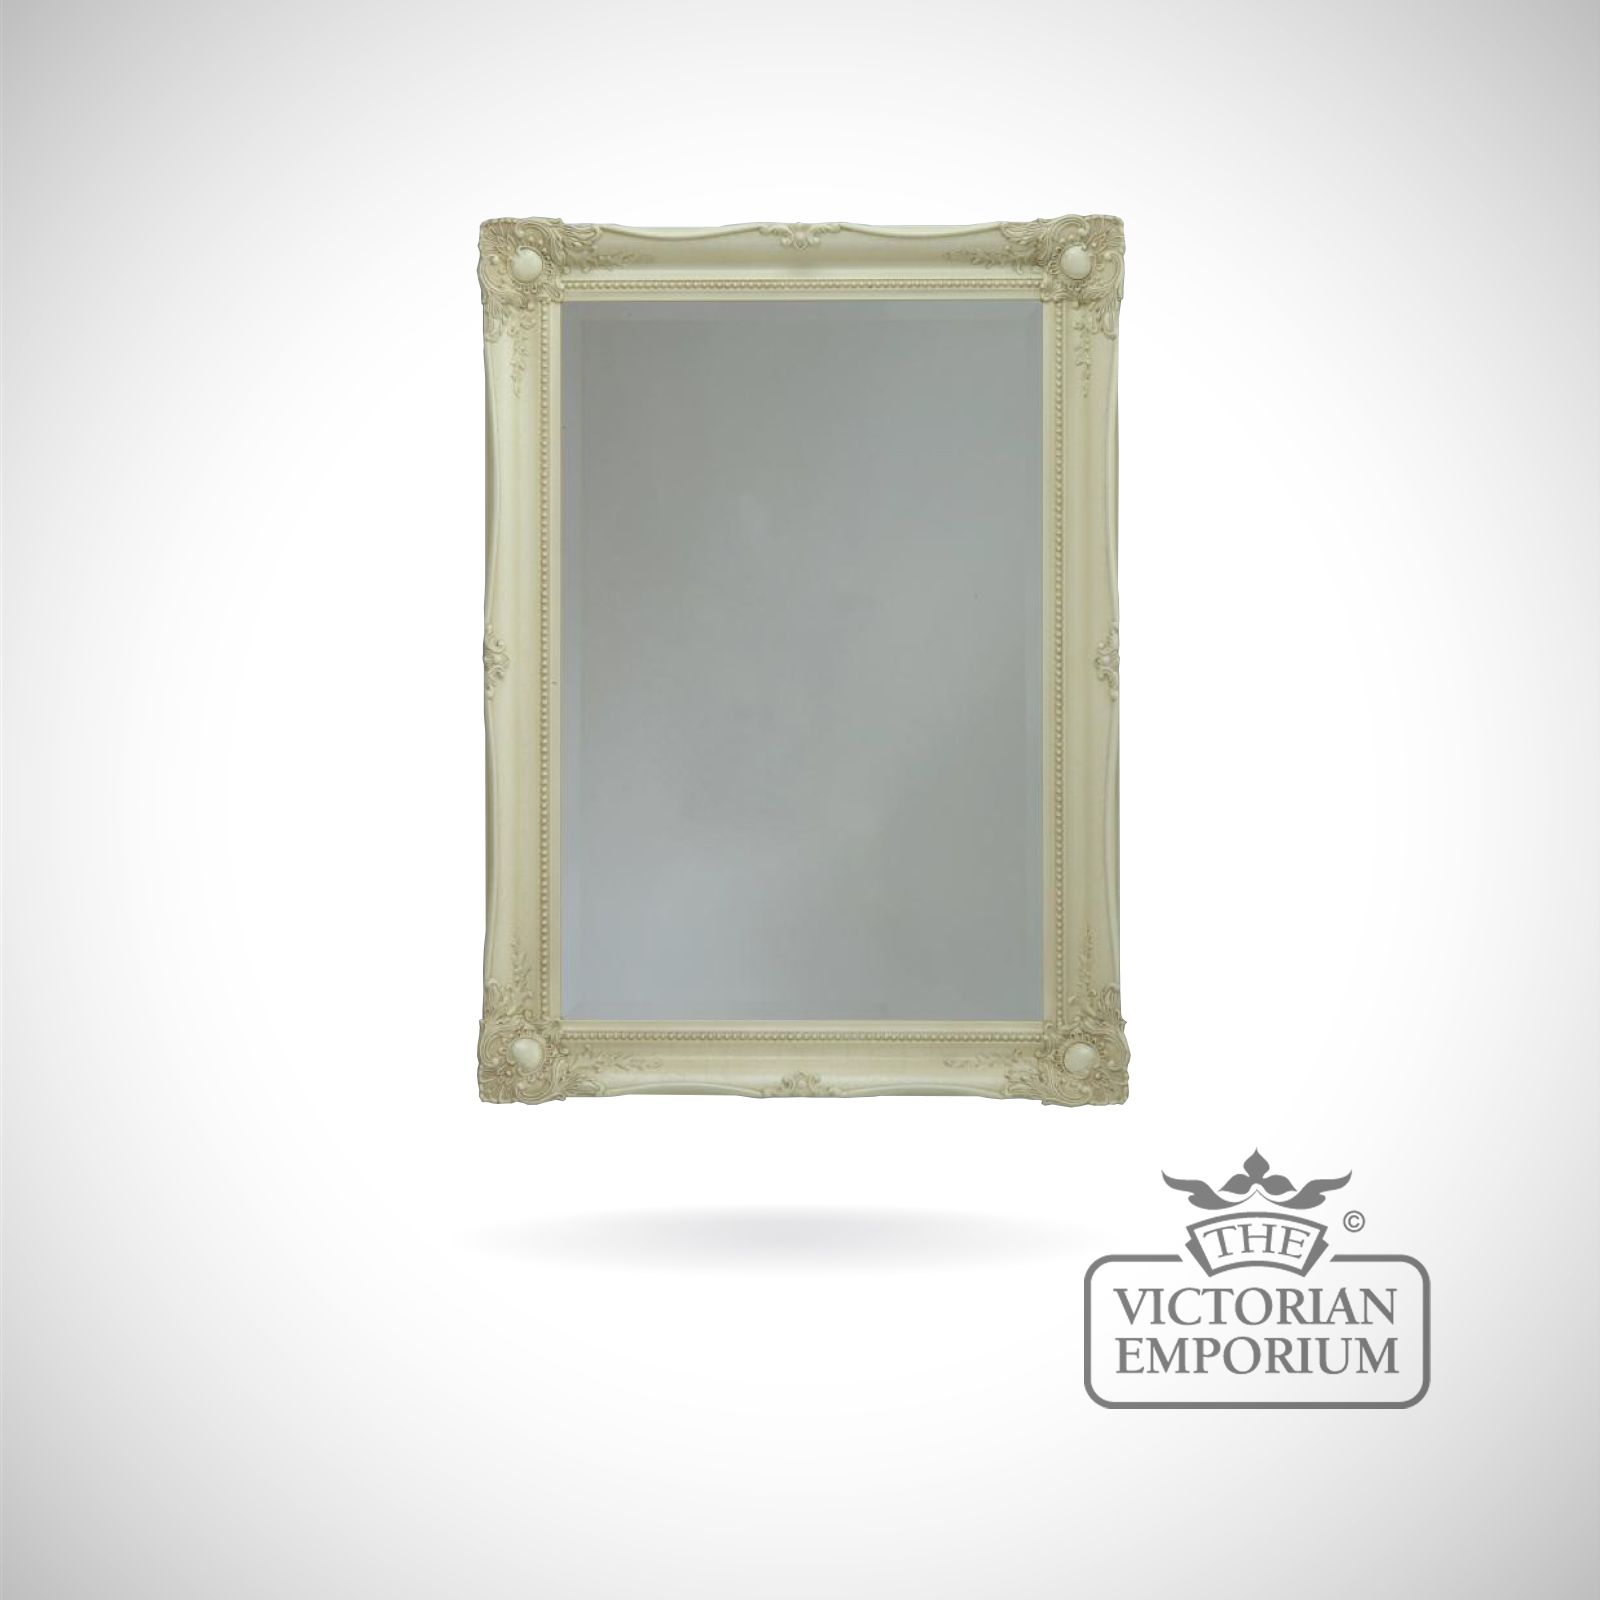 Newport Mirror with ivory frame in a choice of sizes